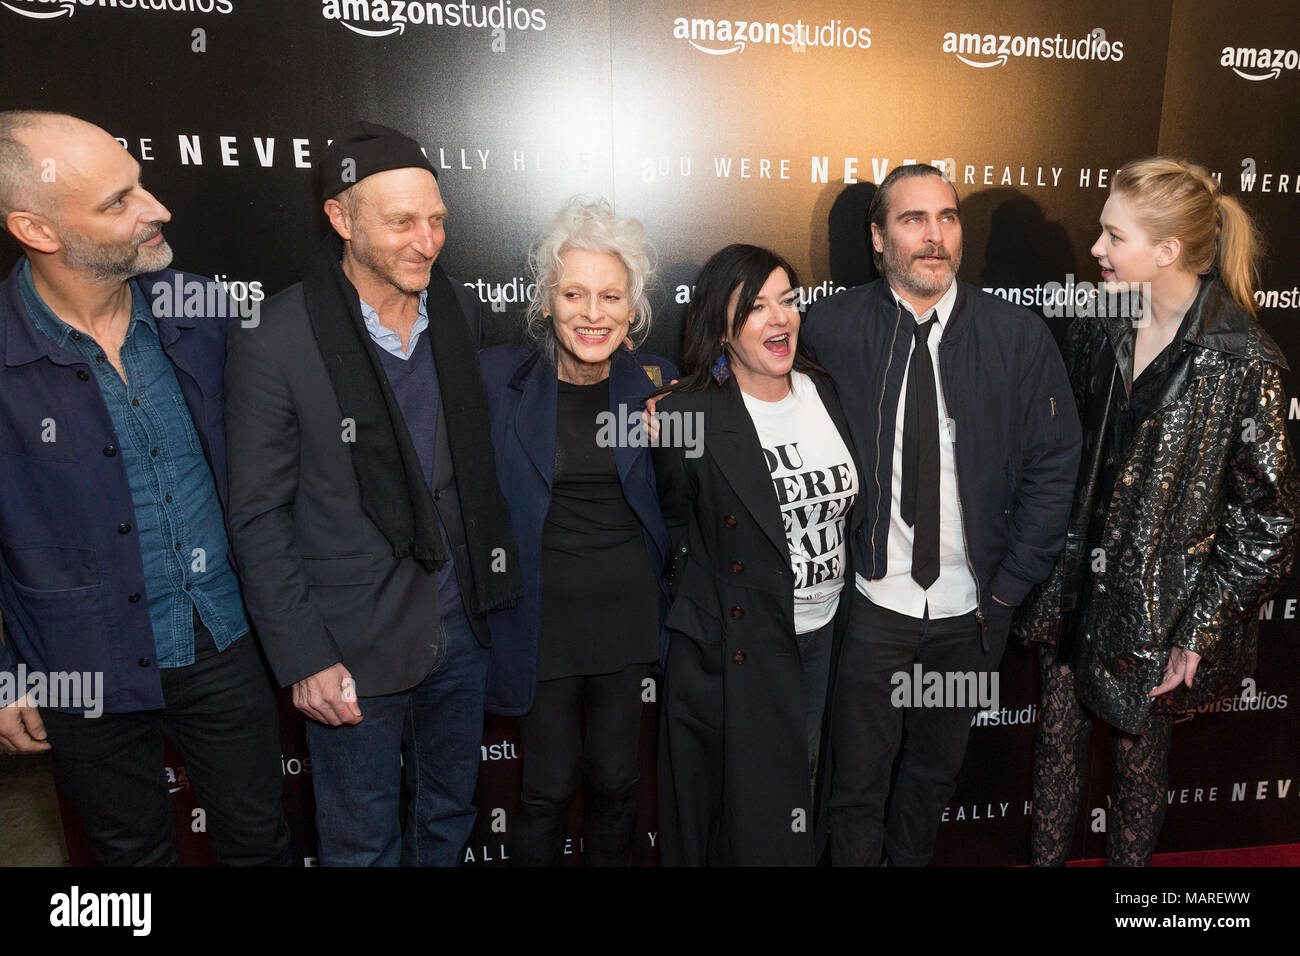 New York, United States. 03rd Apr, 2018. Cast attends the New York special screening of Amazon Studios You Were Never Really Here at Metrograph Credit: Lev Radin/Pacific Press/Alamy Live News Stock Photo